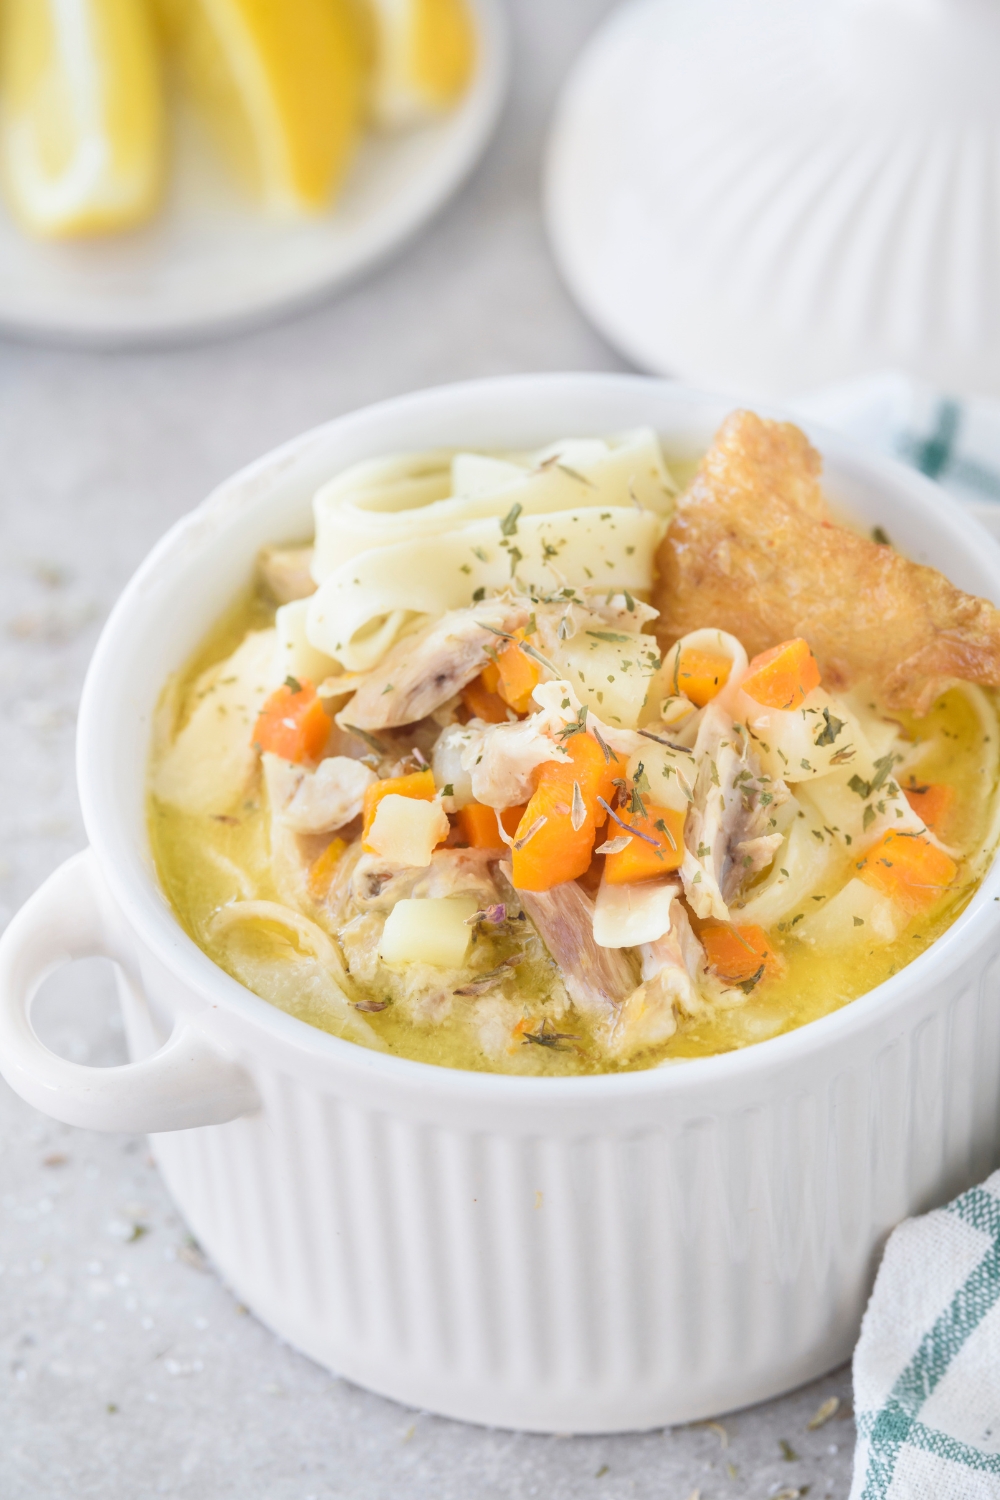 A bowl of chicken noodle soup with chunks of carrots, potatoes, and crispy chicken skin in the soup. The soup is garnished with herbs.